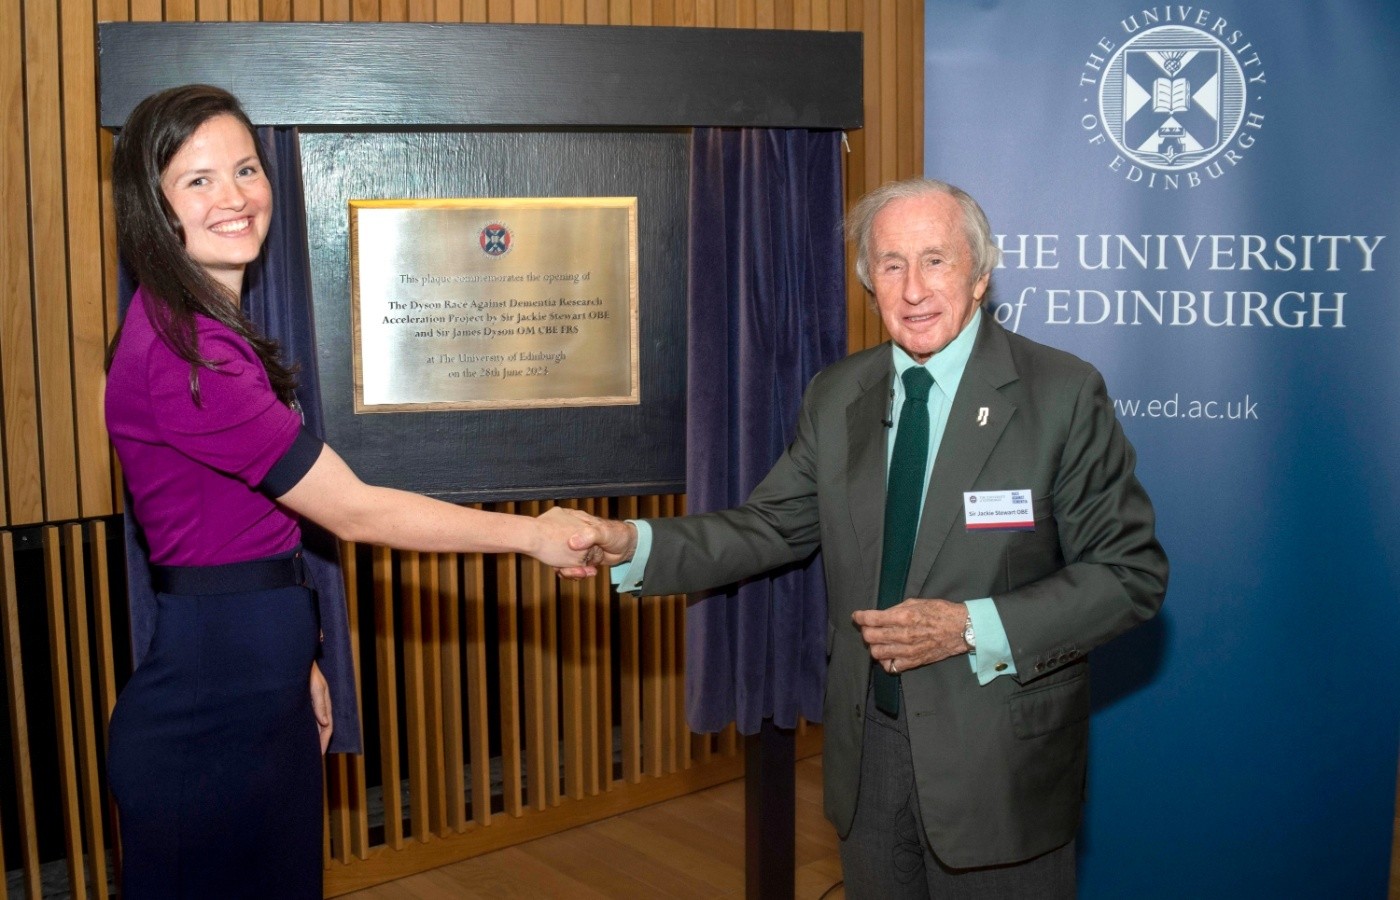 Dr Claire Durrant and Sir Jackie Stewart unveil a plaque celebrating the launch of the Dyson RAD Dementia Research Acceleration Project.